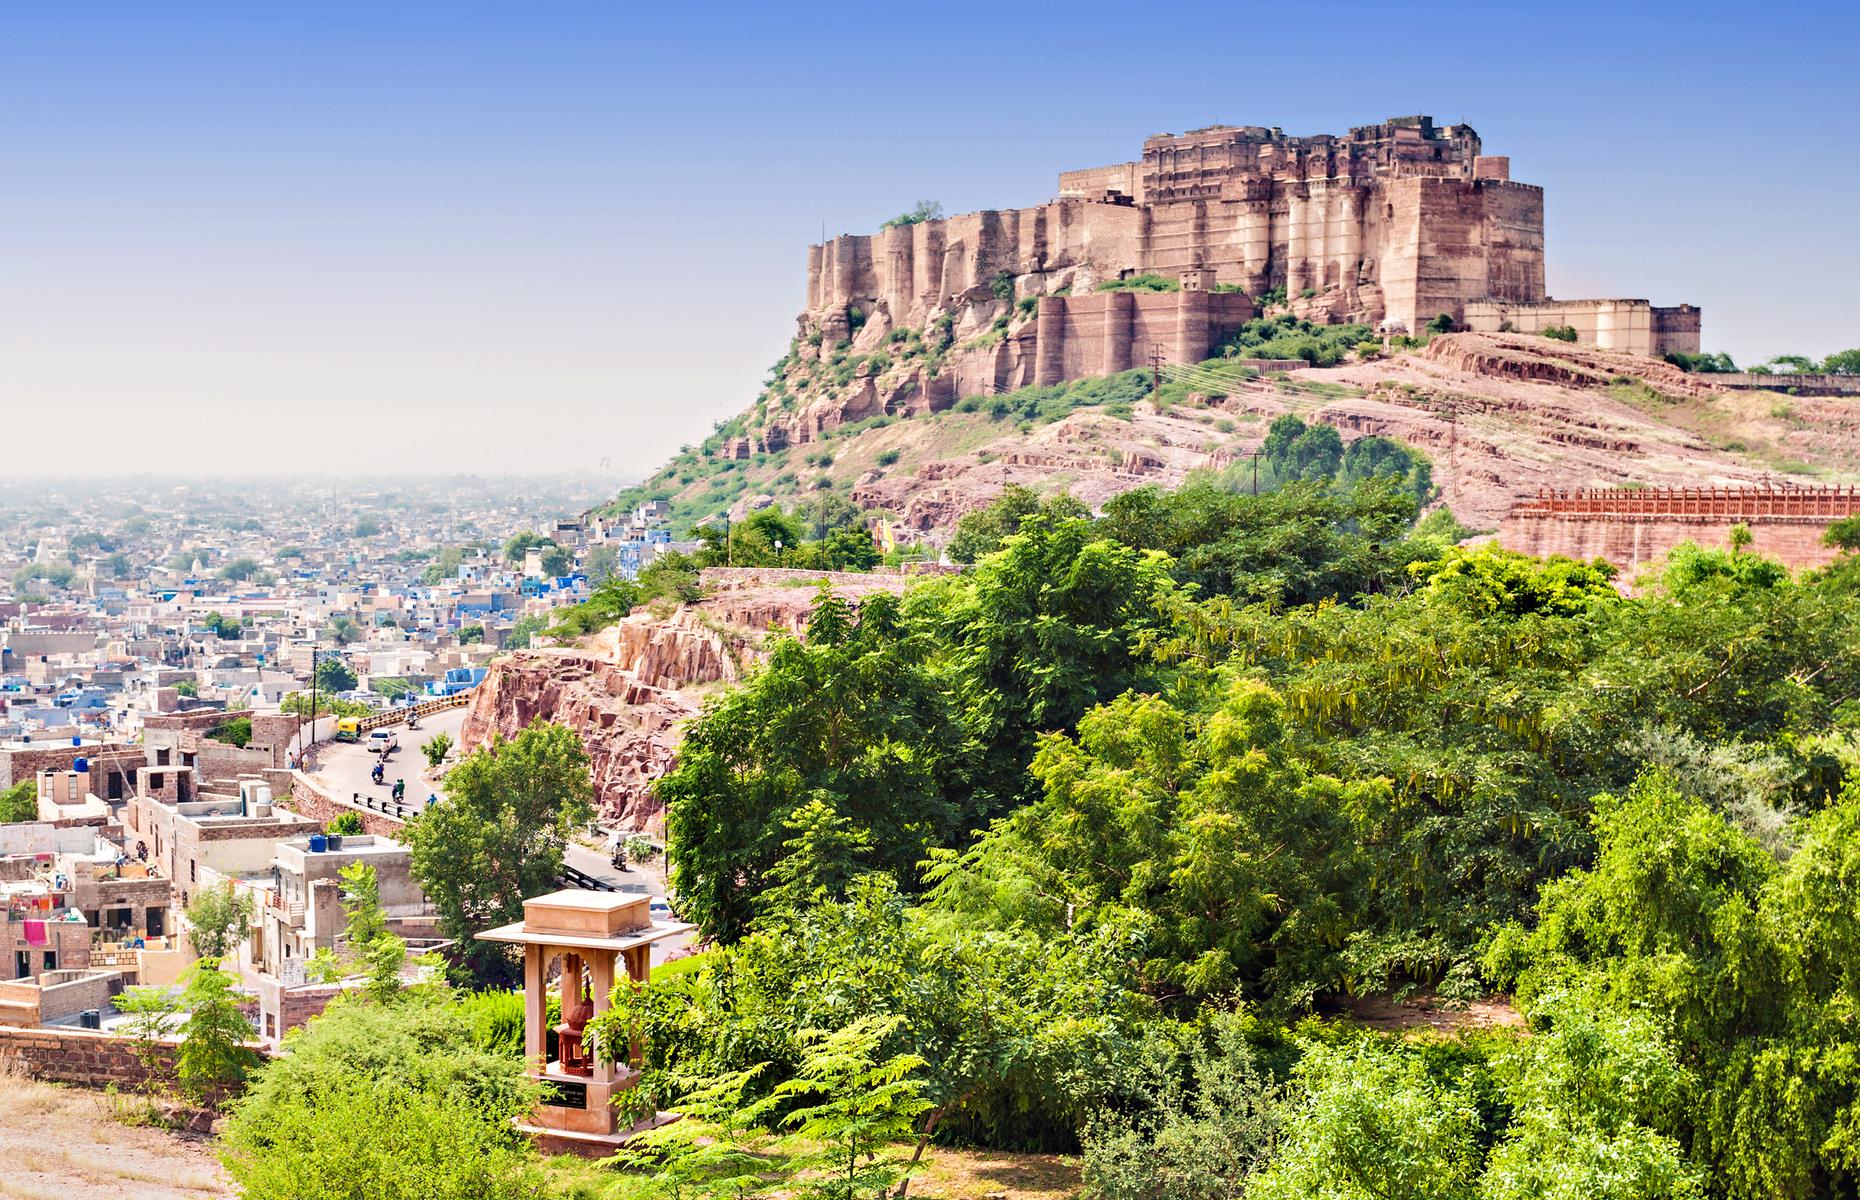 <p>The sprawling 15th-century Mehrangarh Fort dominates the skyline of Jodhpur and is one of India’s largest palaces. Other must-sees in this desert city include the blue houses of the labyrinthine old city and the grand Umaid Bhawan Palace.</p>